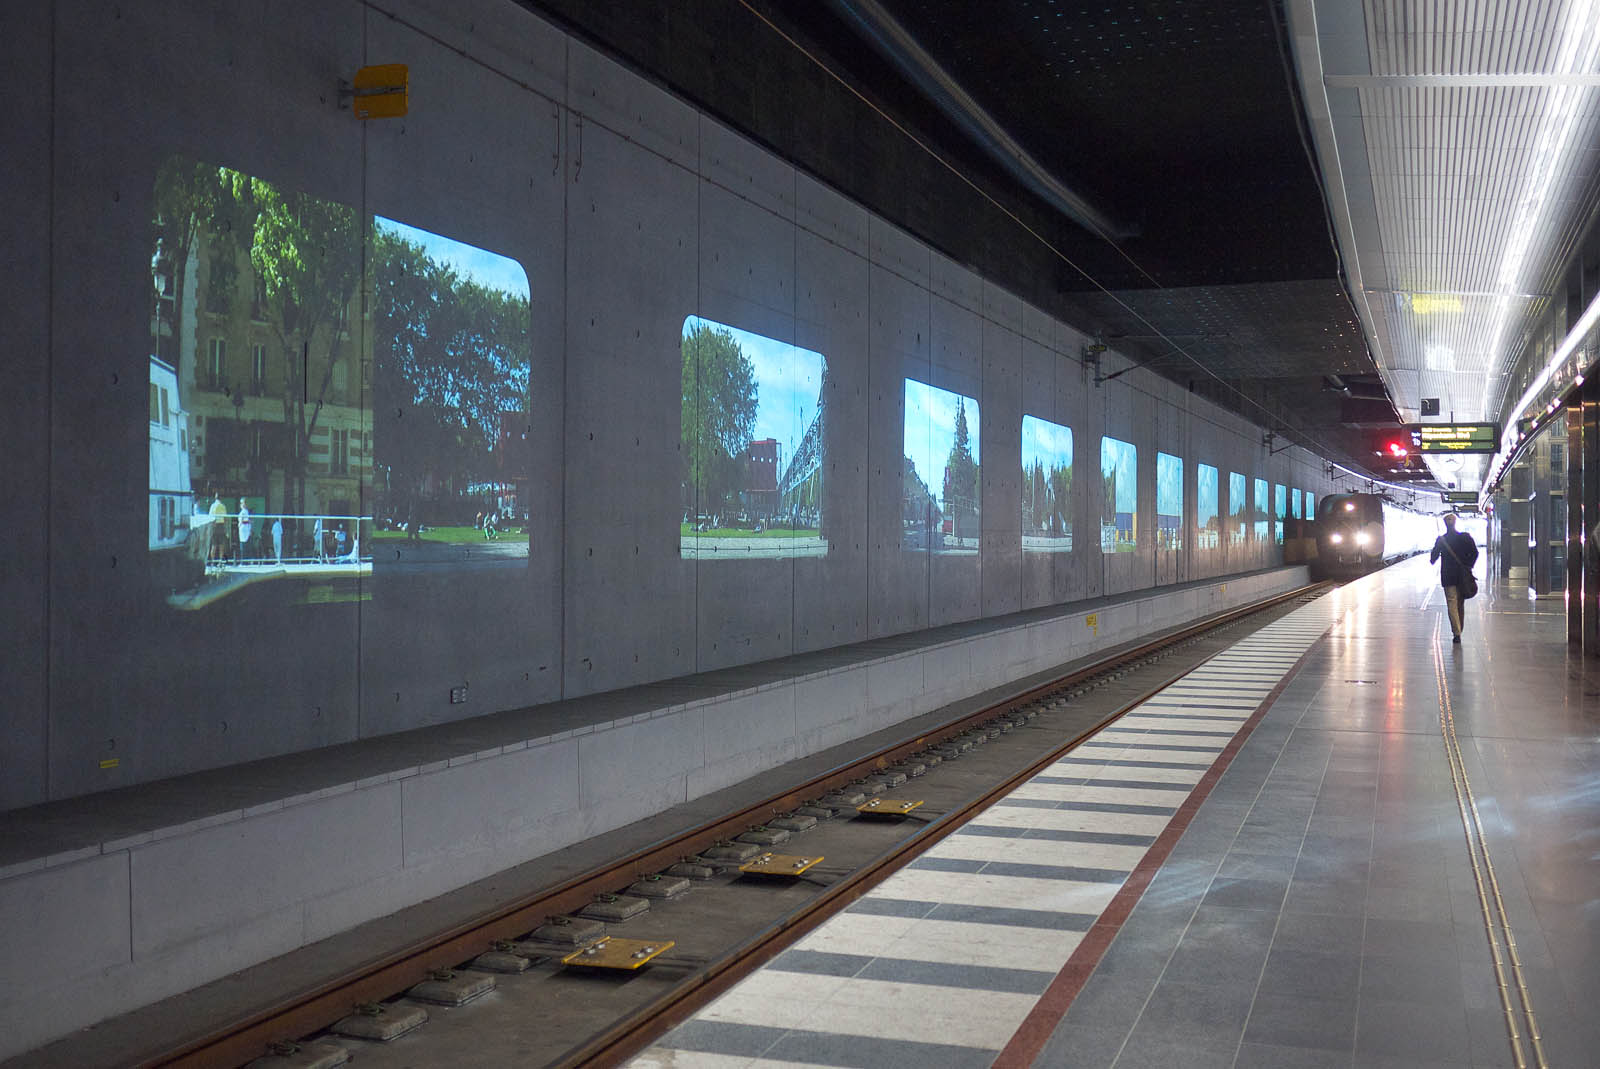 A train entering the station. On the wall projections of houses and trees.